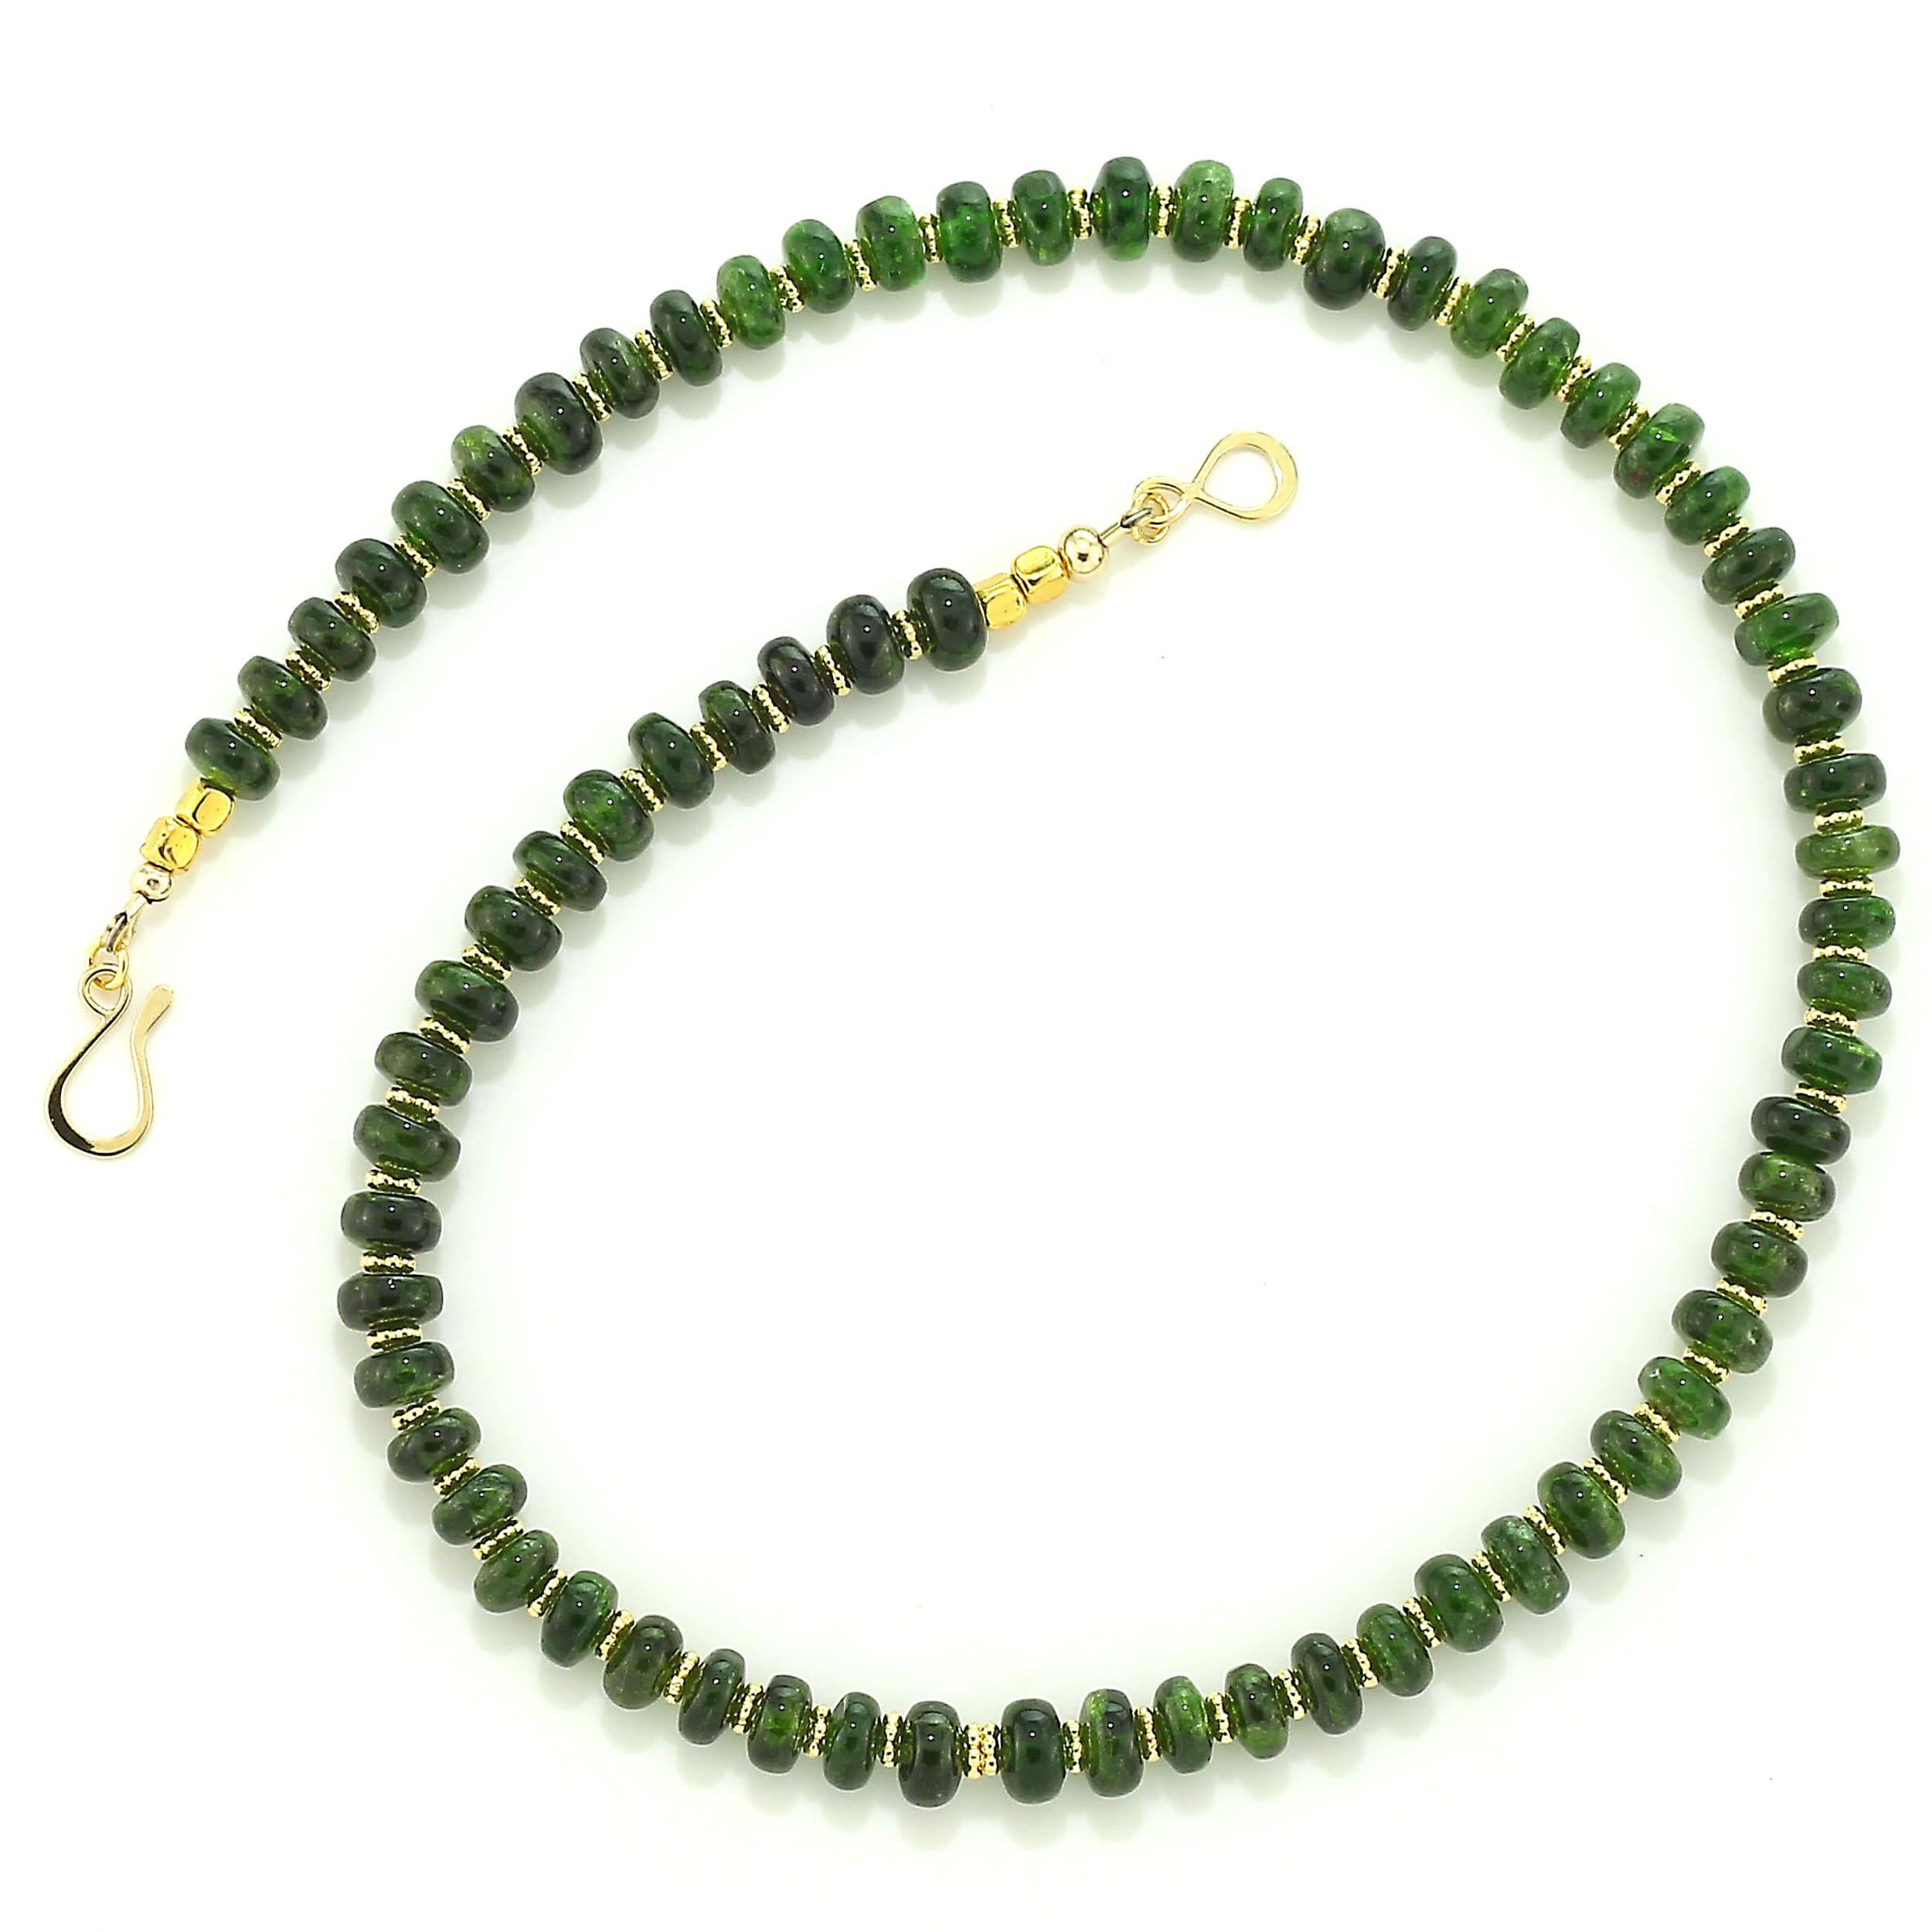 Unique deep green Chrome Diopside ﻿17 inch necklace with goldy daisy accents and 14K gold vermeil hook and eye clasp. This lovely translucent Chrome Diopside is 8 MM rondelles which are highly polished on the entire surface.  The rich gold tone